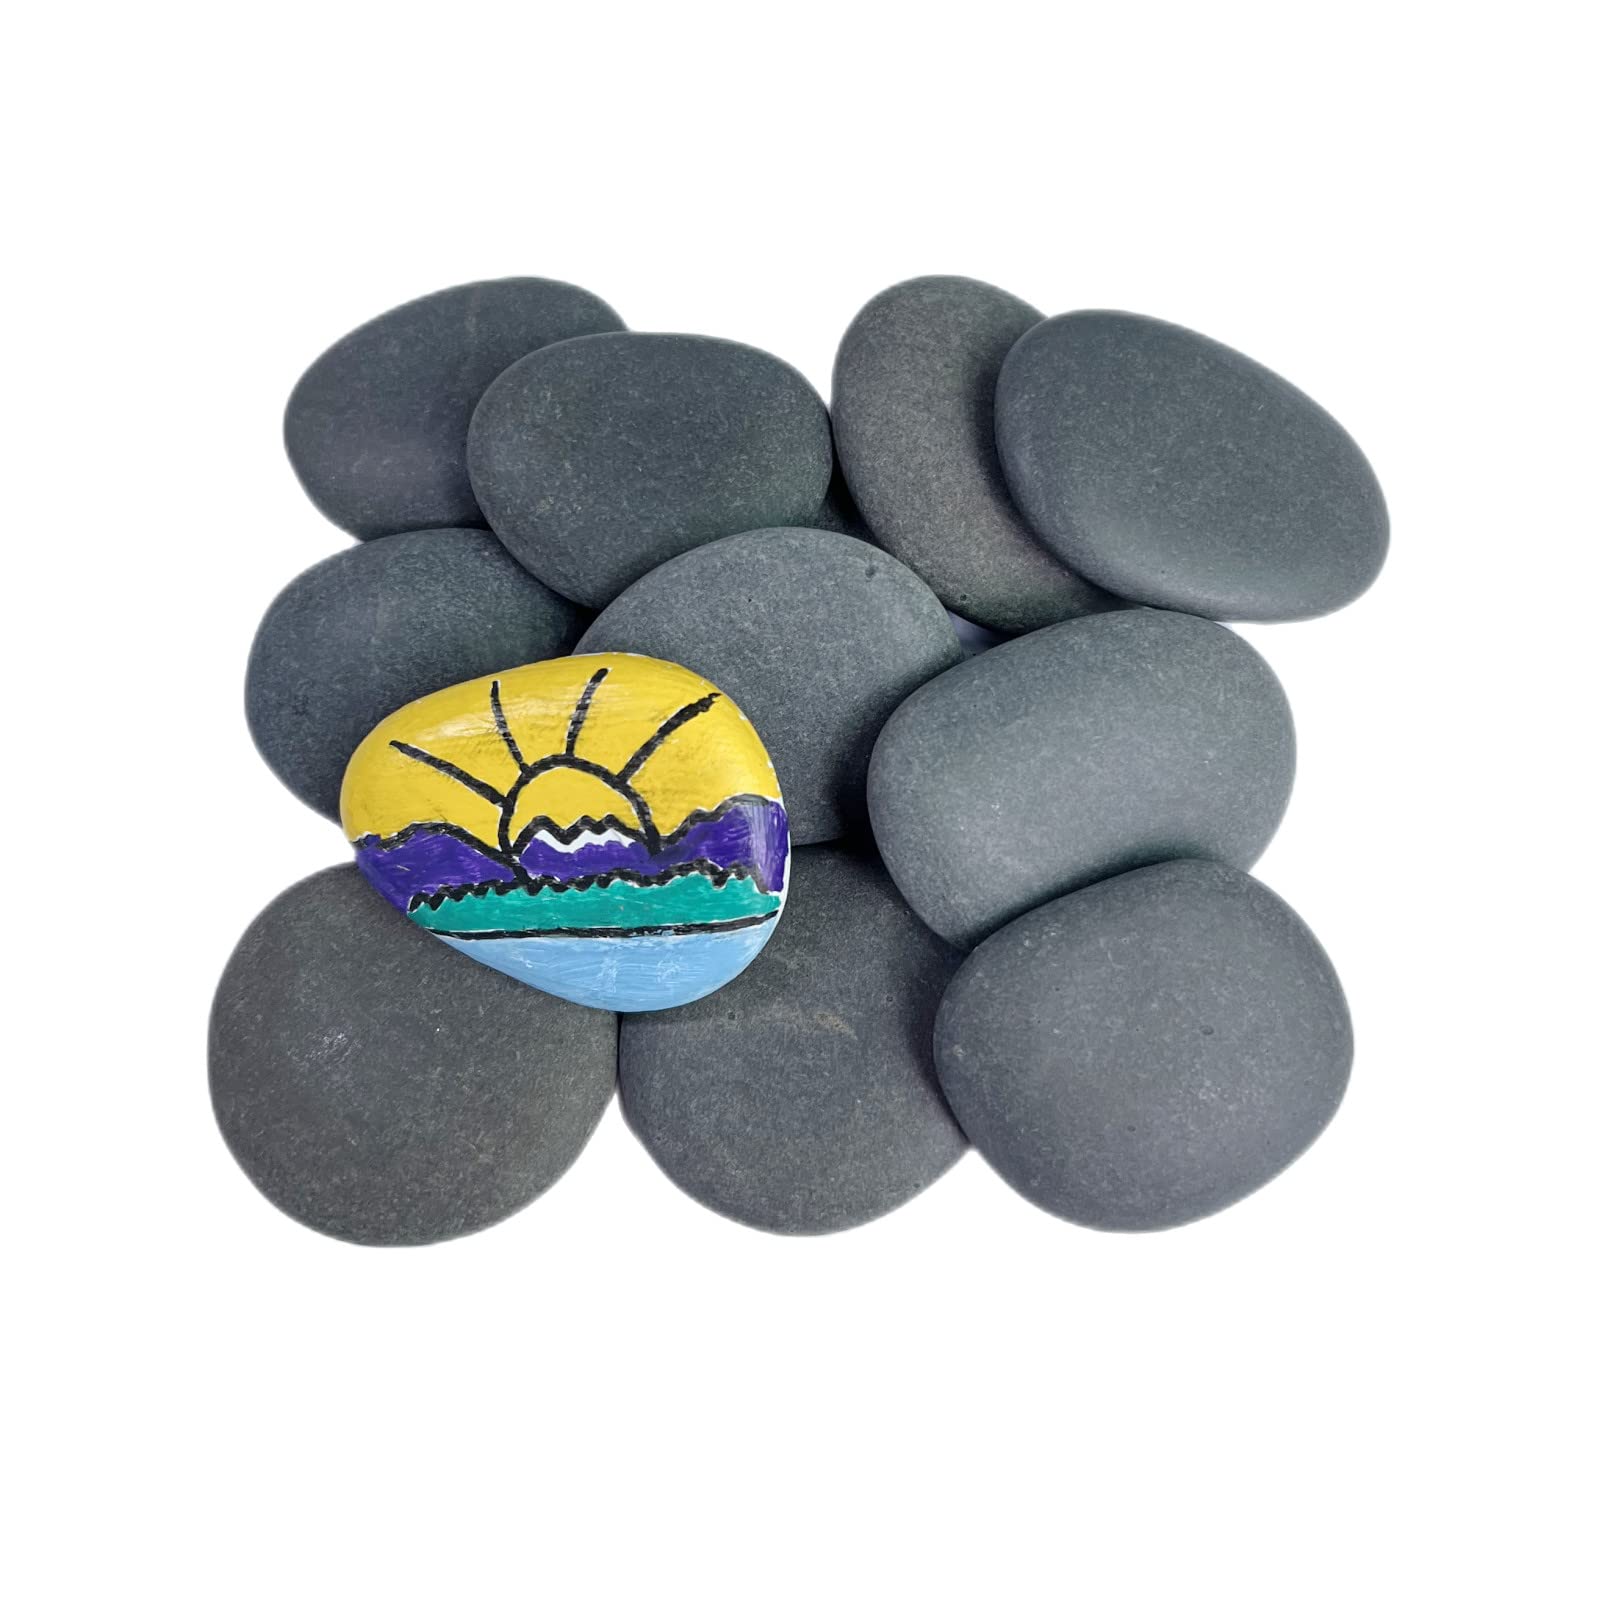 DIY Rocks Hand Picked Flat Smooth Kindness Rocks for Painting